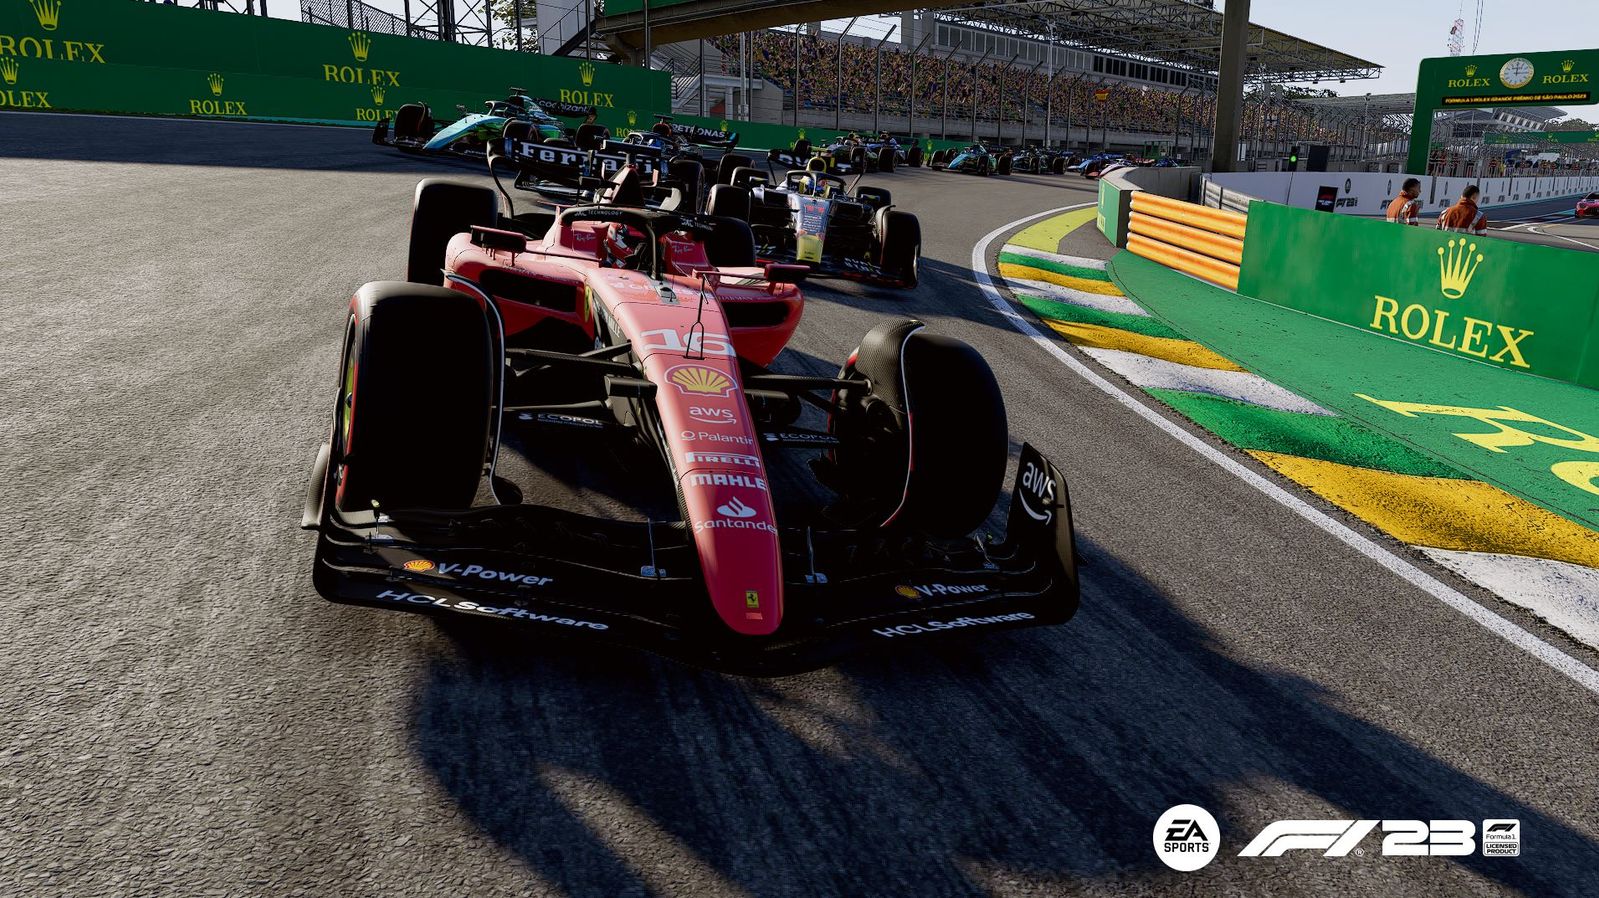 Charles Leclerc leads the grid into the first corner in Brazil in F1 23